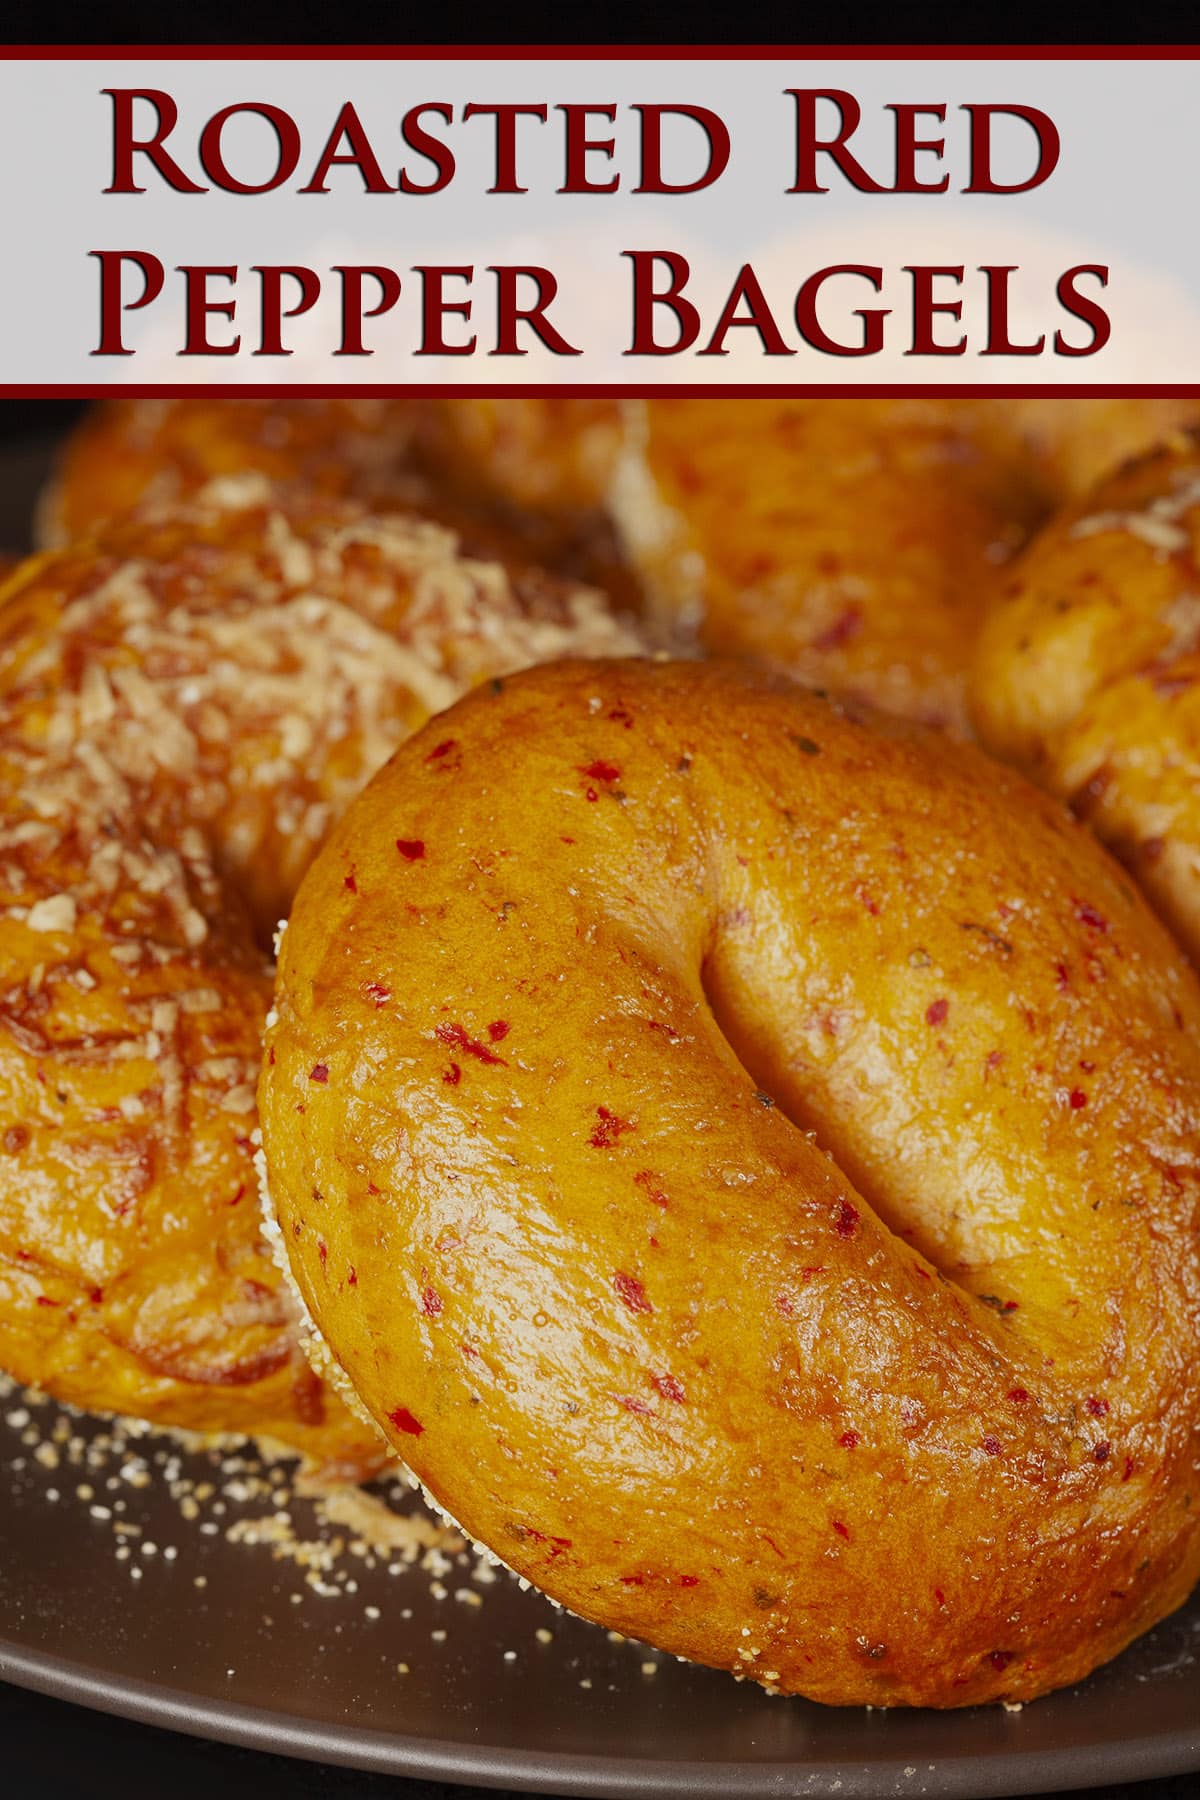 A plate of roasted red pepper bagels, some with Parmesan cheese on top.